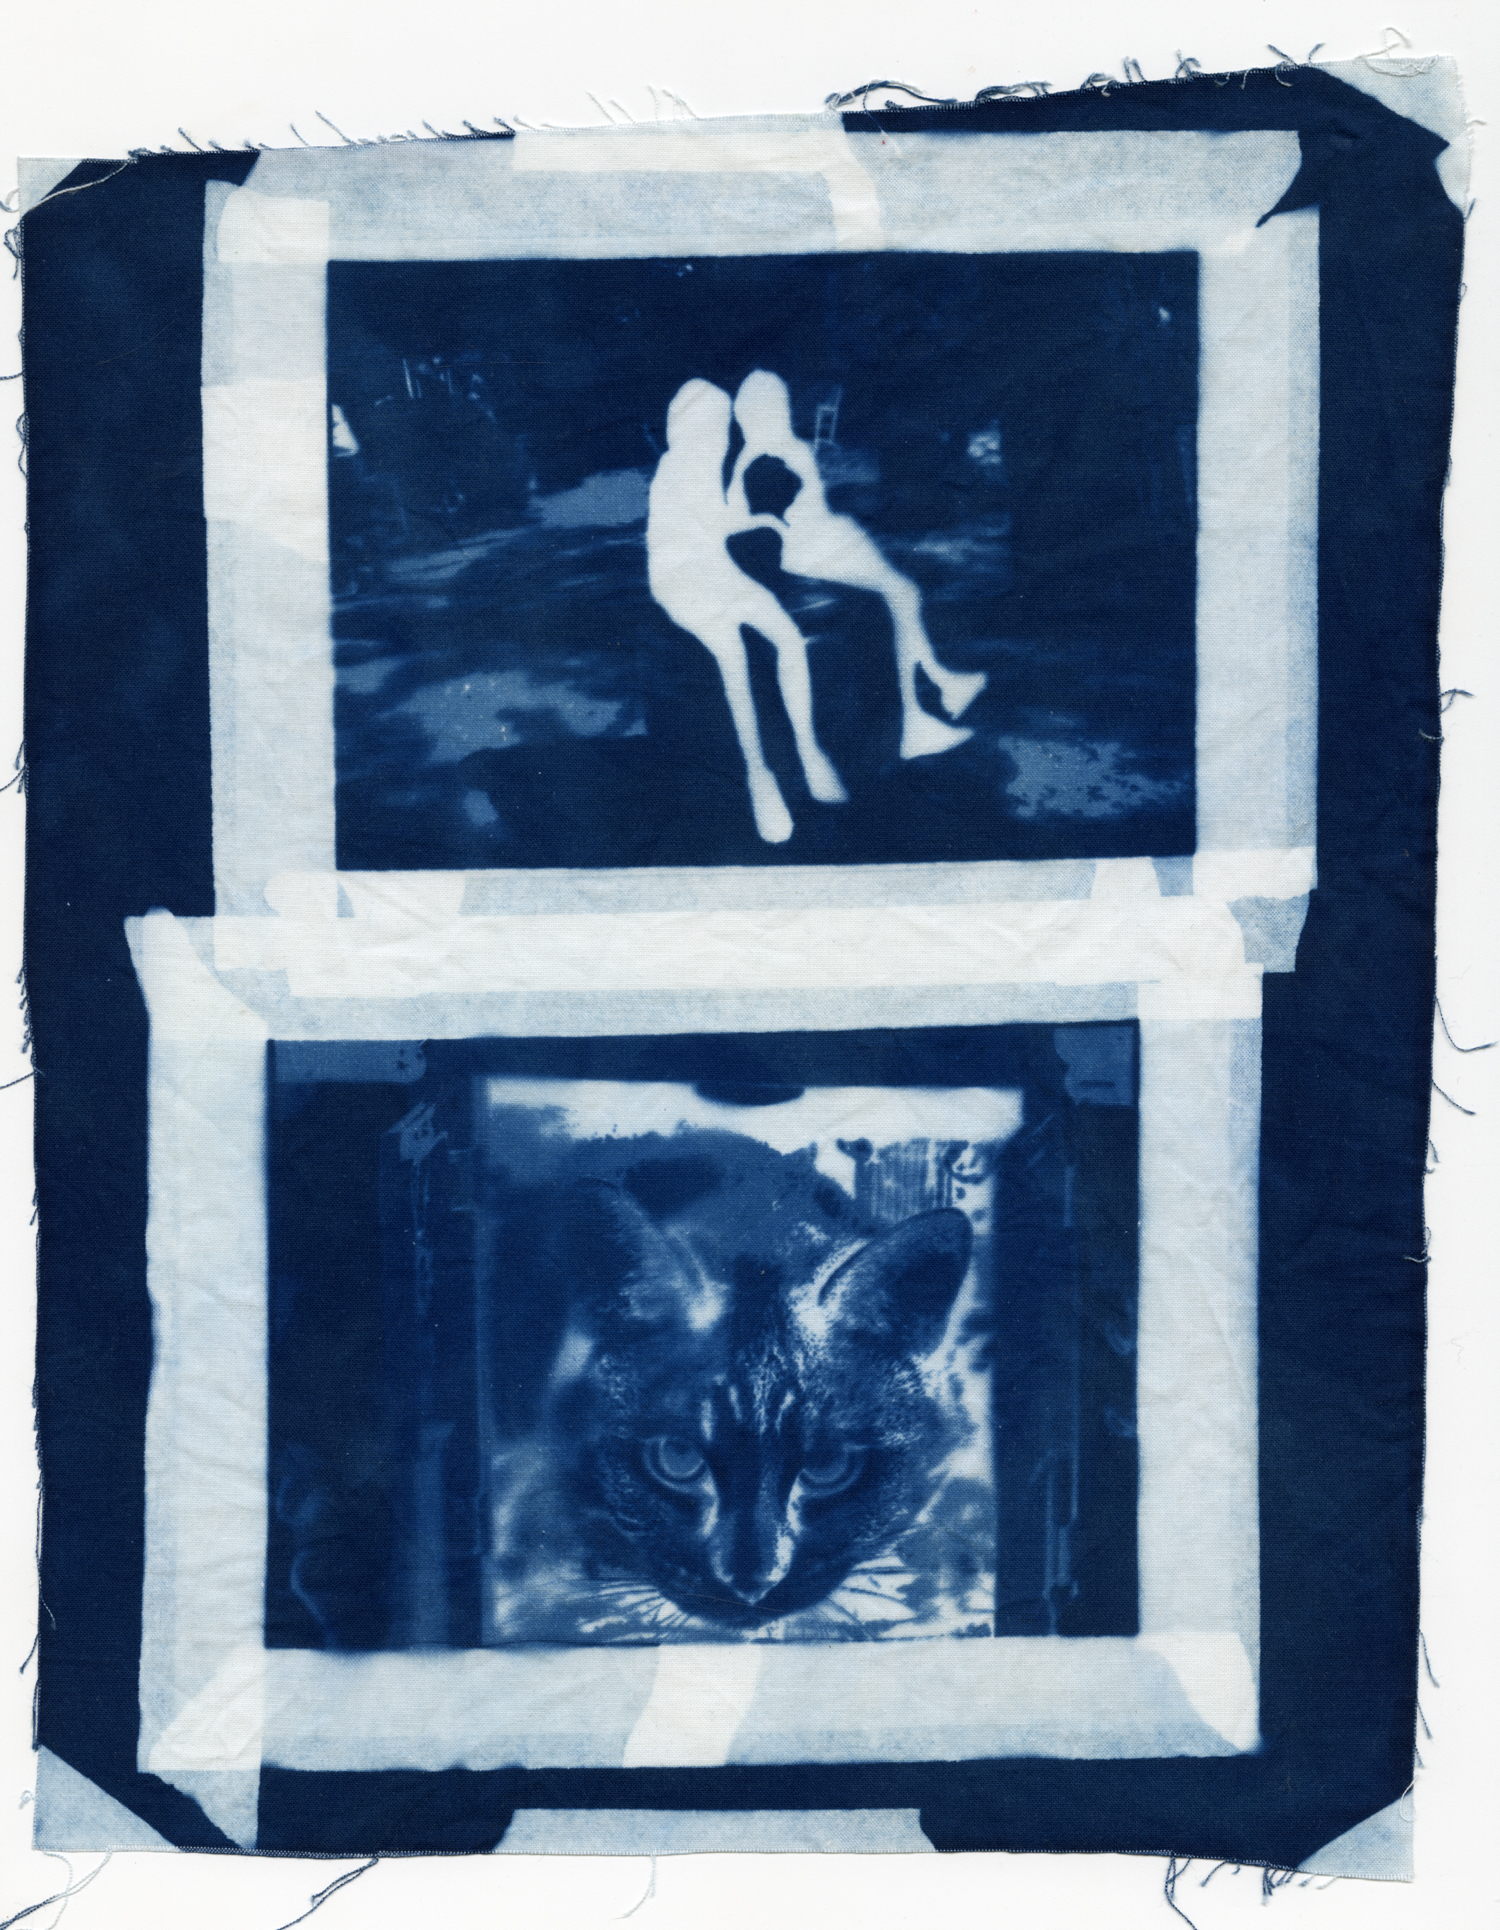 Blue cyanotype on frayed fabric of two childhood images, one with the figures of two girls blocked out, with only the background visible, and one with the negative of a cat's face staring out at the viewer